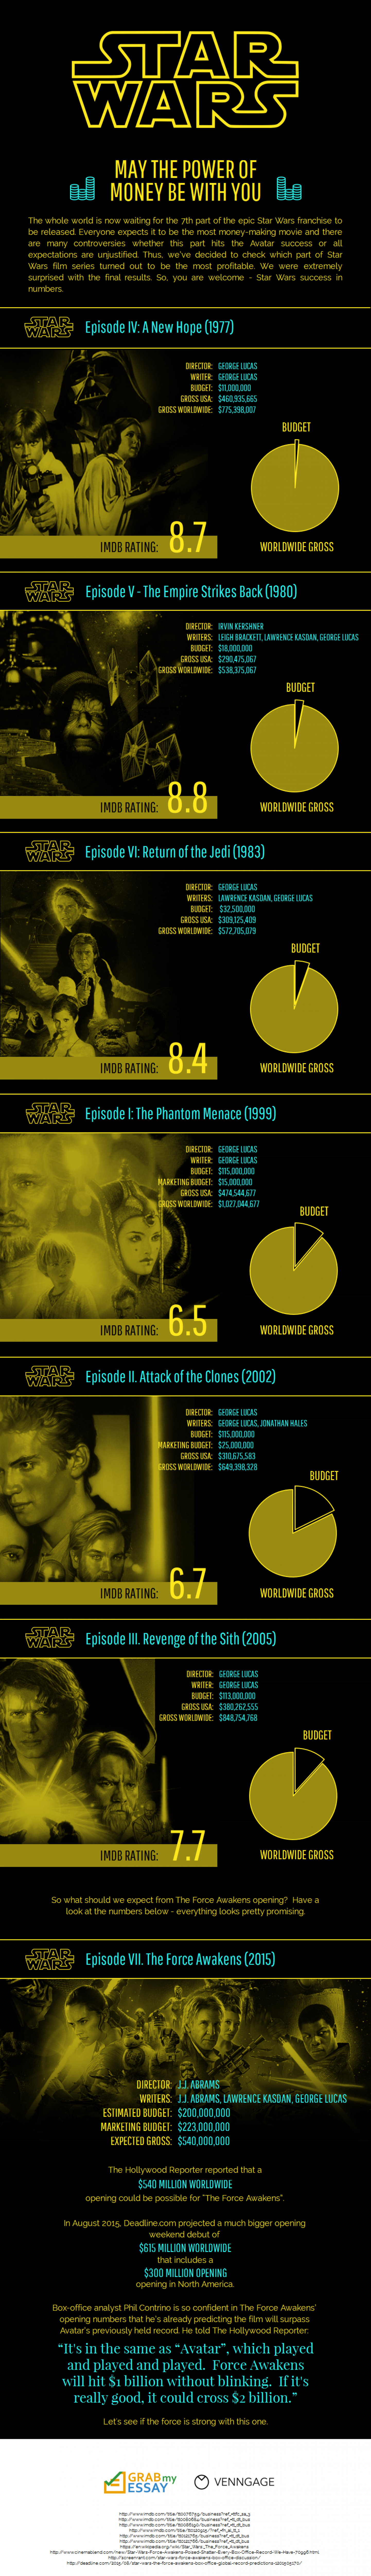 Star Wars Gross Income Infographic